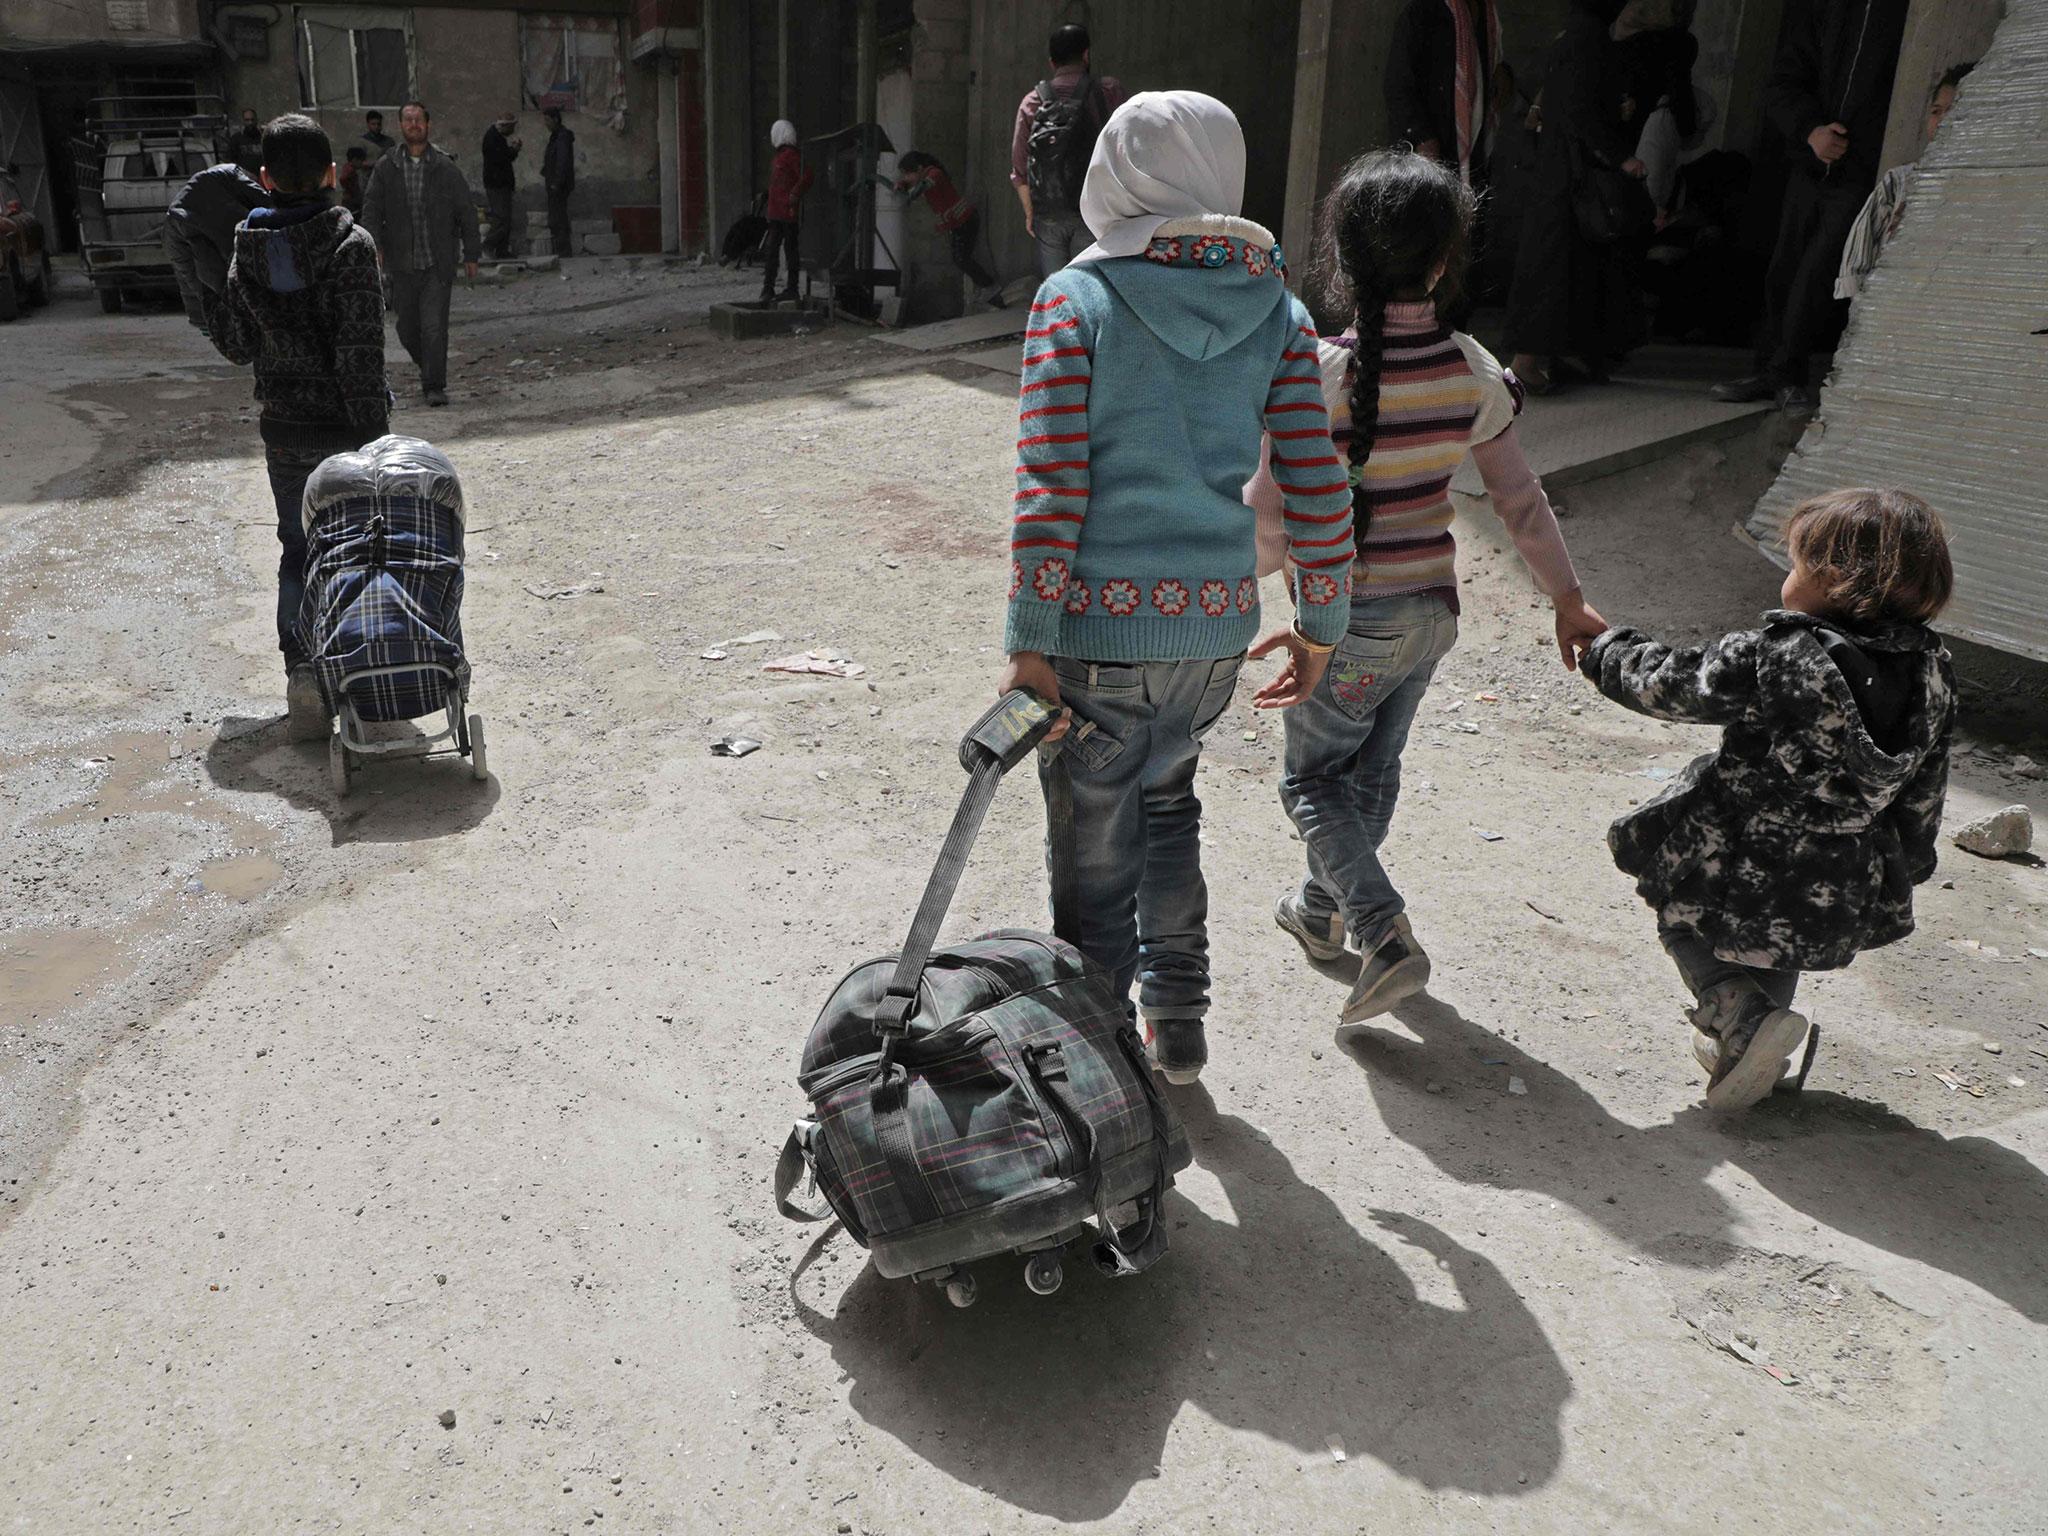 Syrian children walk with their luggage as they wait for their evacuation by the Syrian Red Crescent in the rebel-held Eastern Ghouta enclave on Thursday